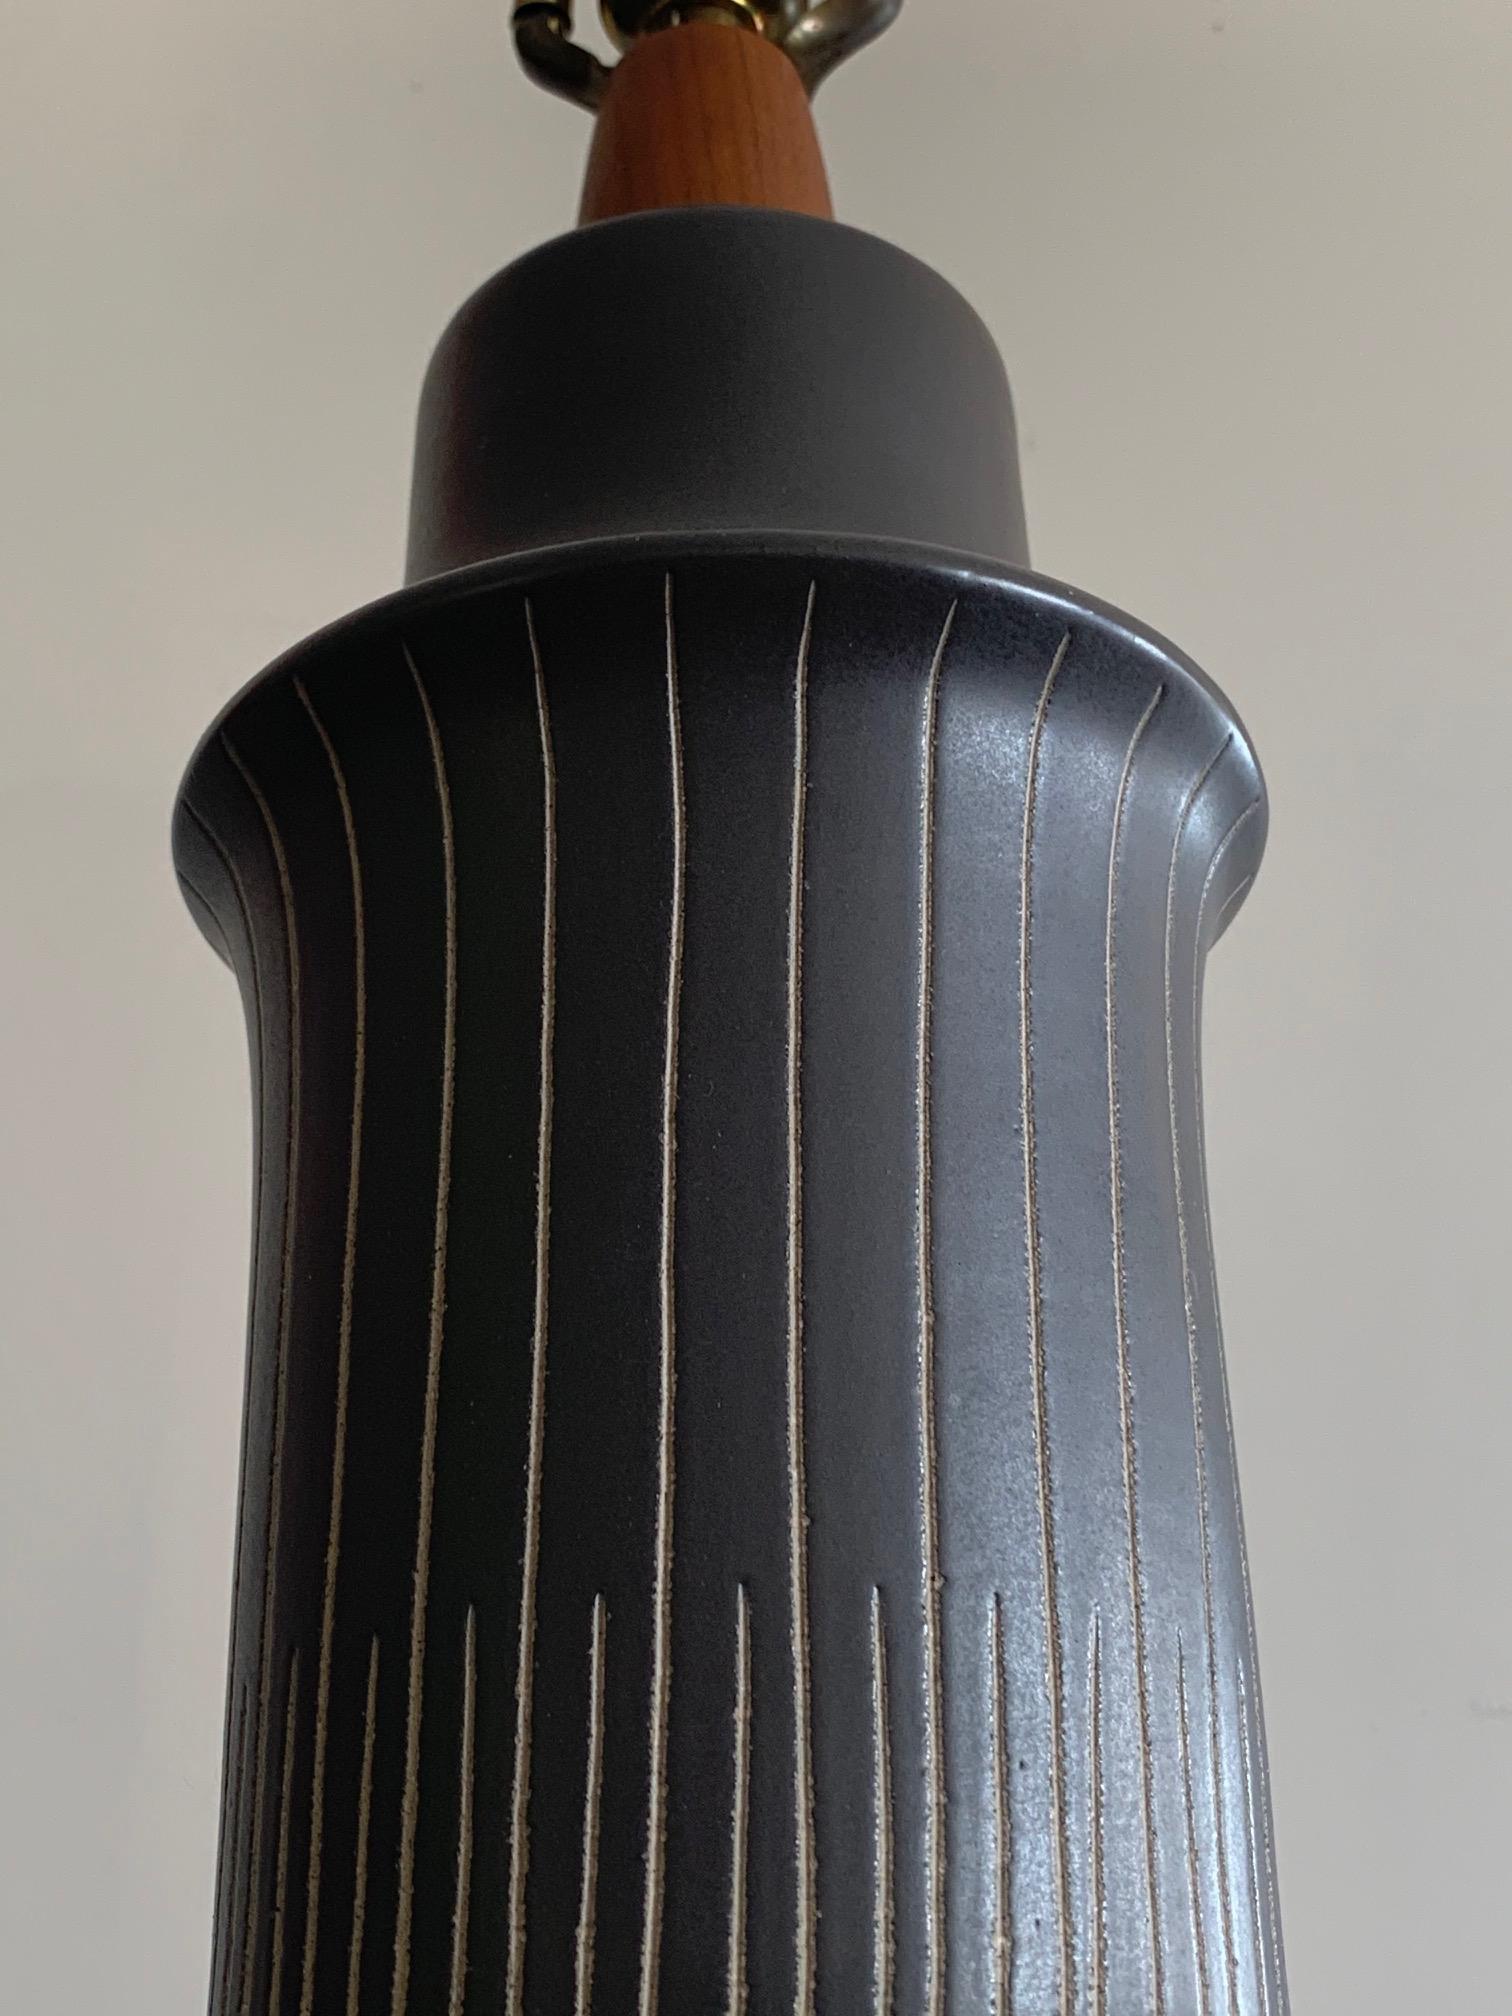 Rare Martz Lamp with Sgraffito Decoration In Good Condition For Sale In St.Petersburg, FL